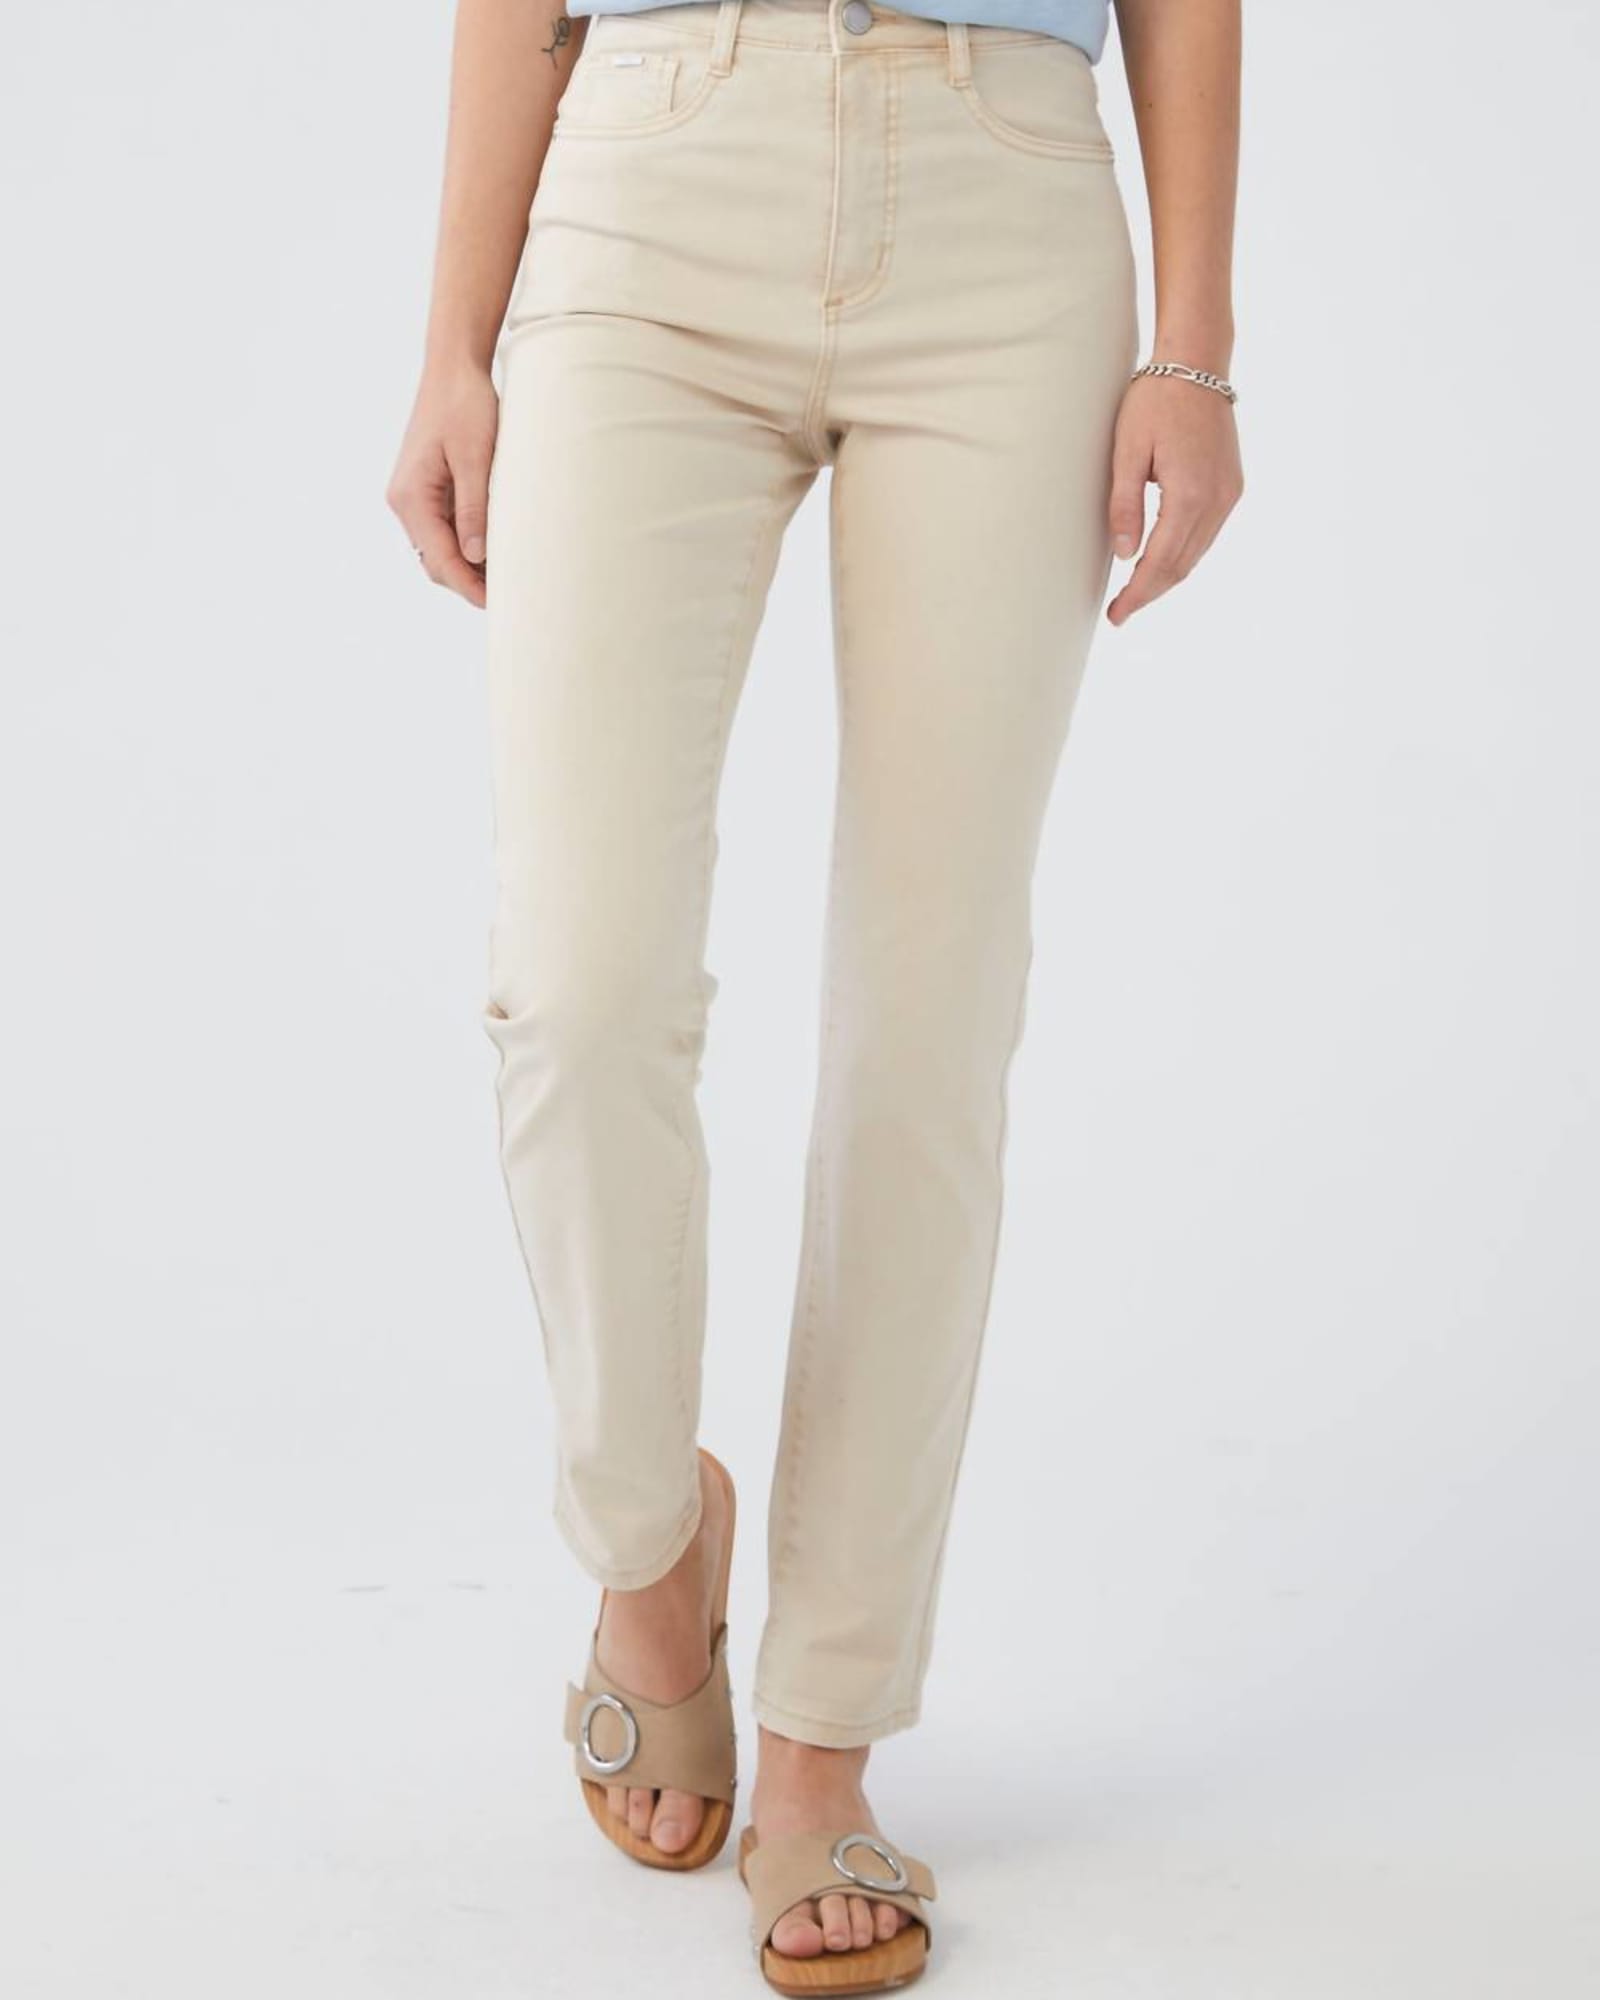 Suzanne Straight Leg Jean In Oyster Shell | Oyster Shell